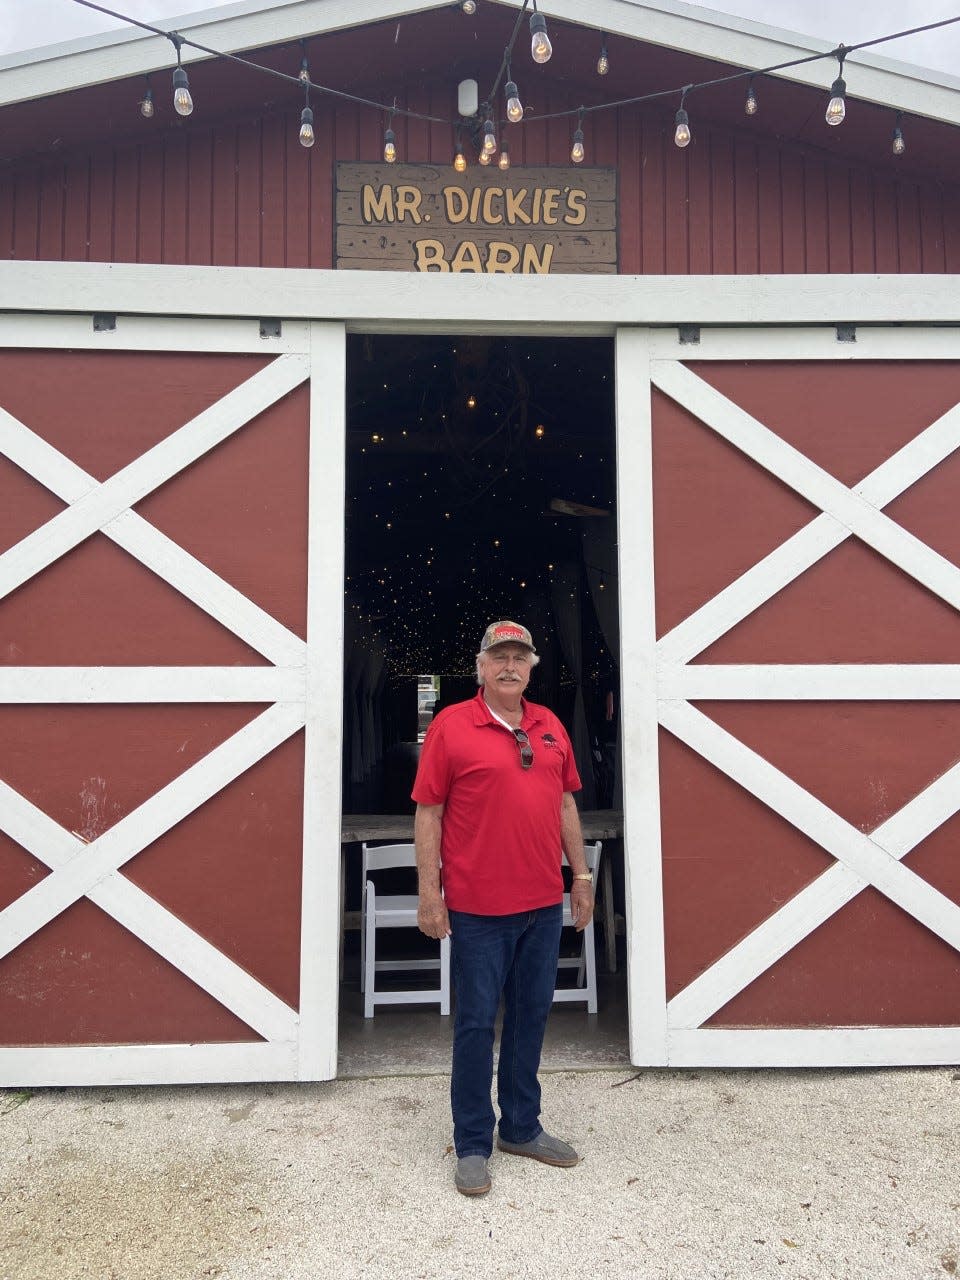 Ricky Smith in front of Mr. Dickie’s Barn.